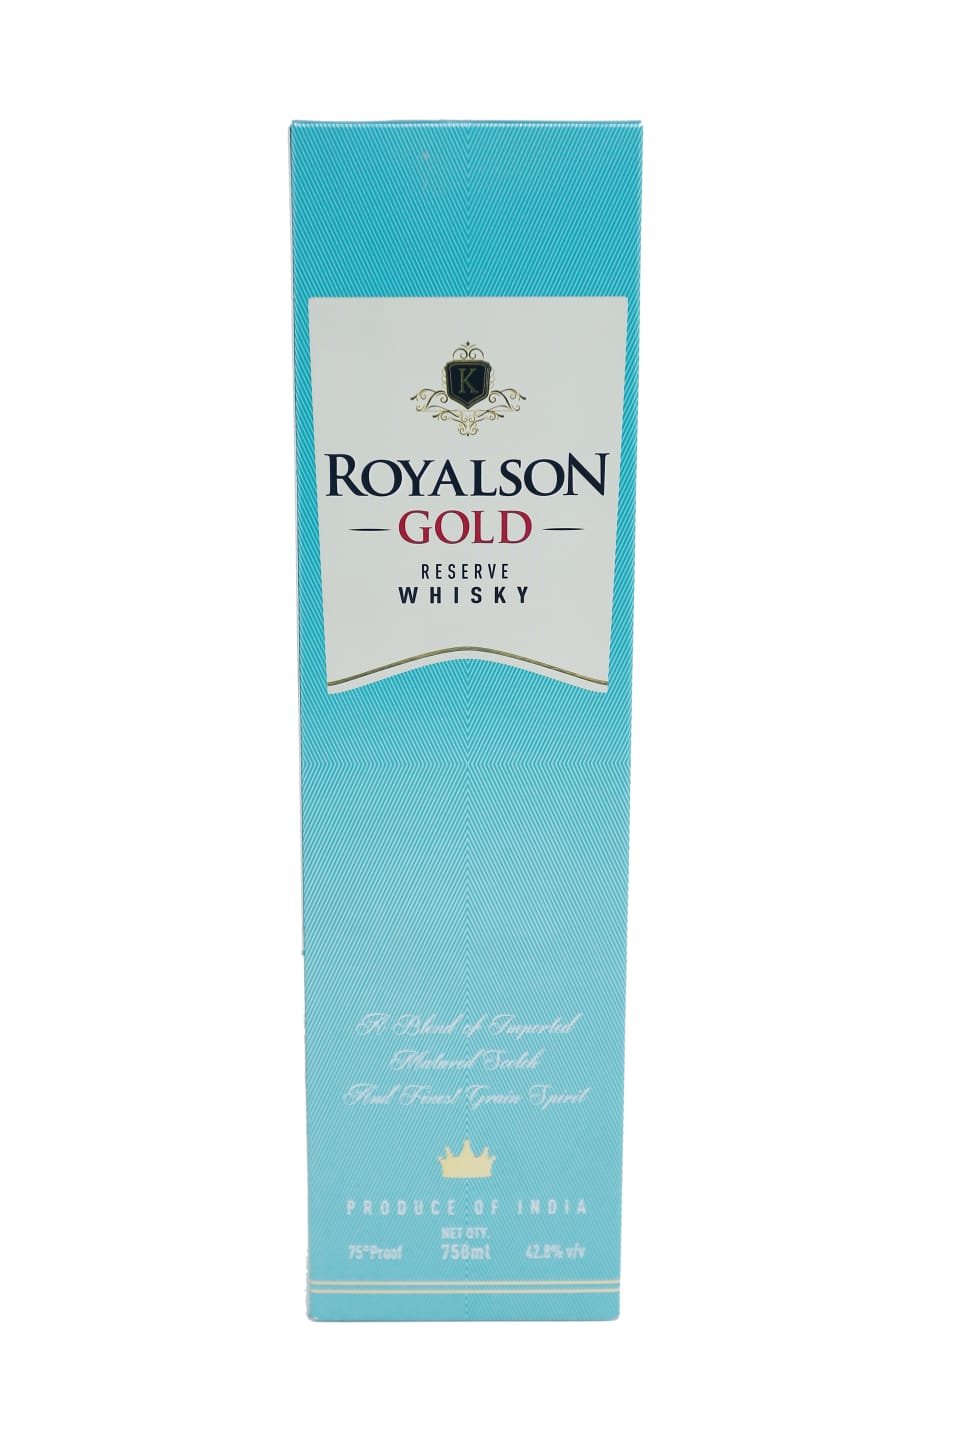 Royalson-gold-reserve-bottle-with-box